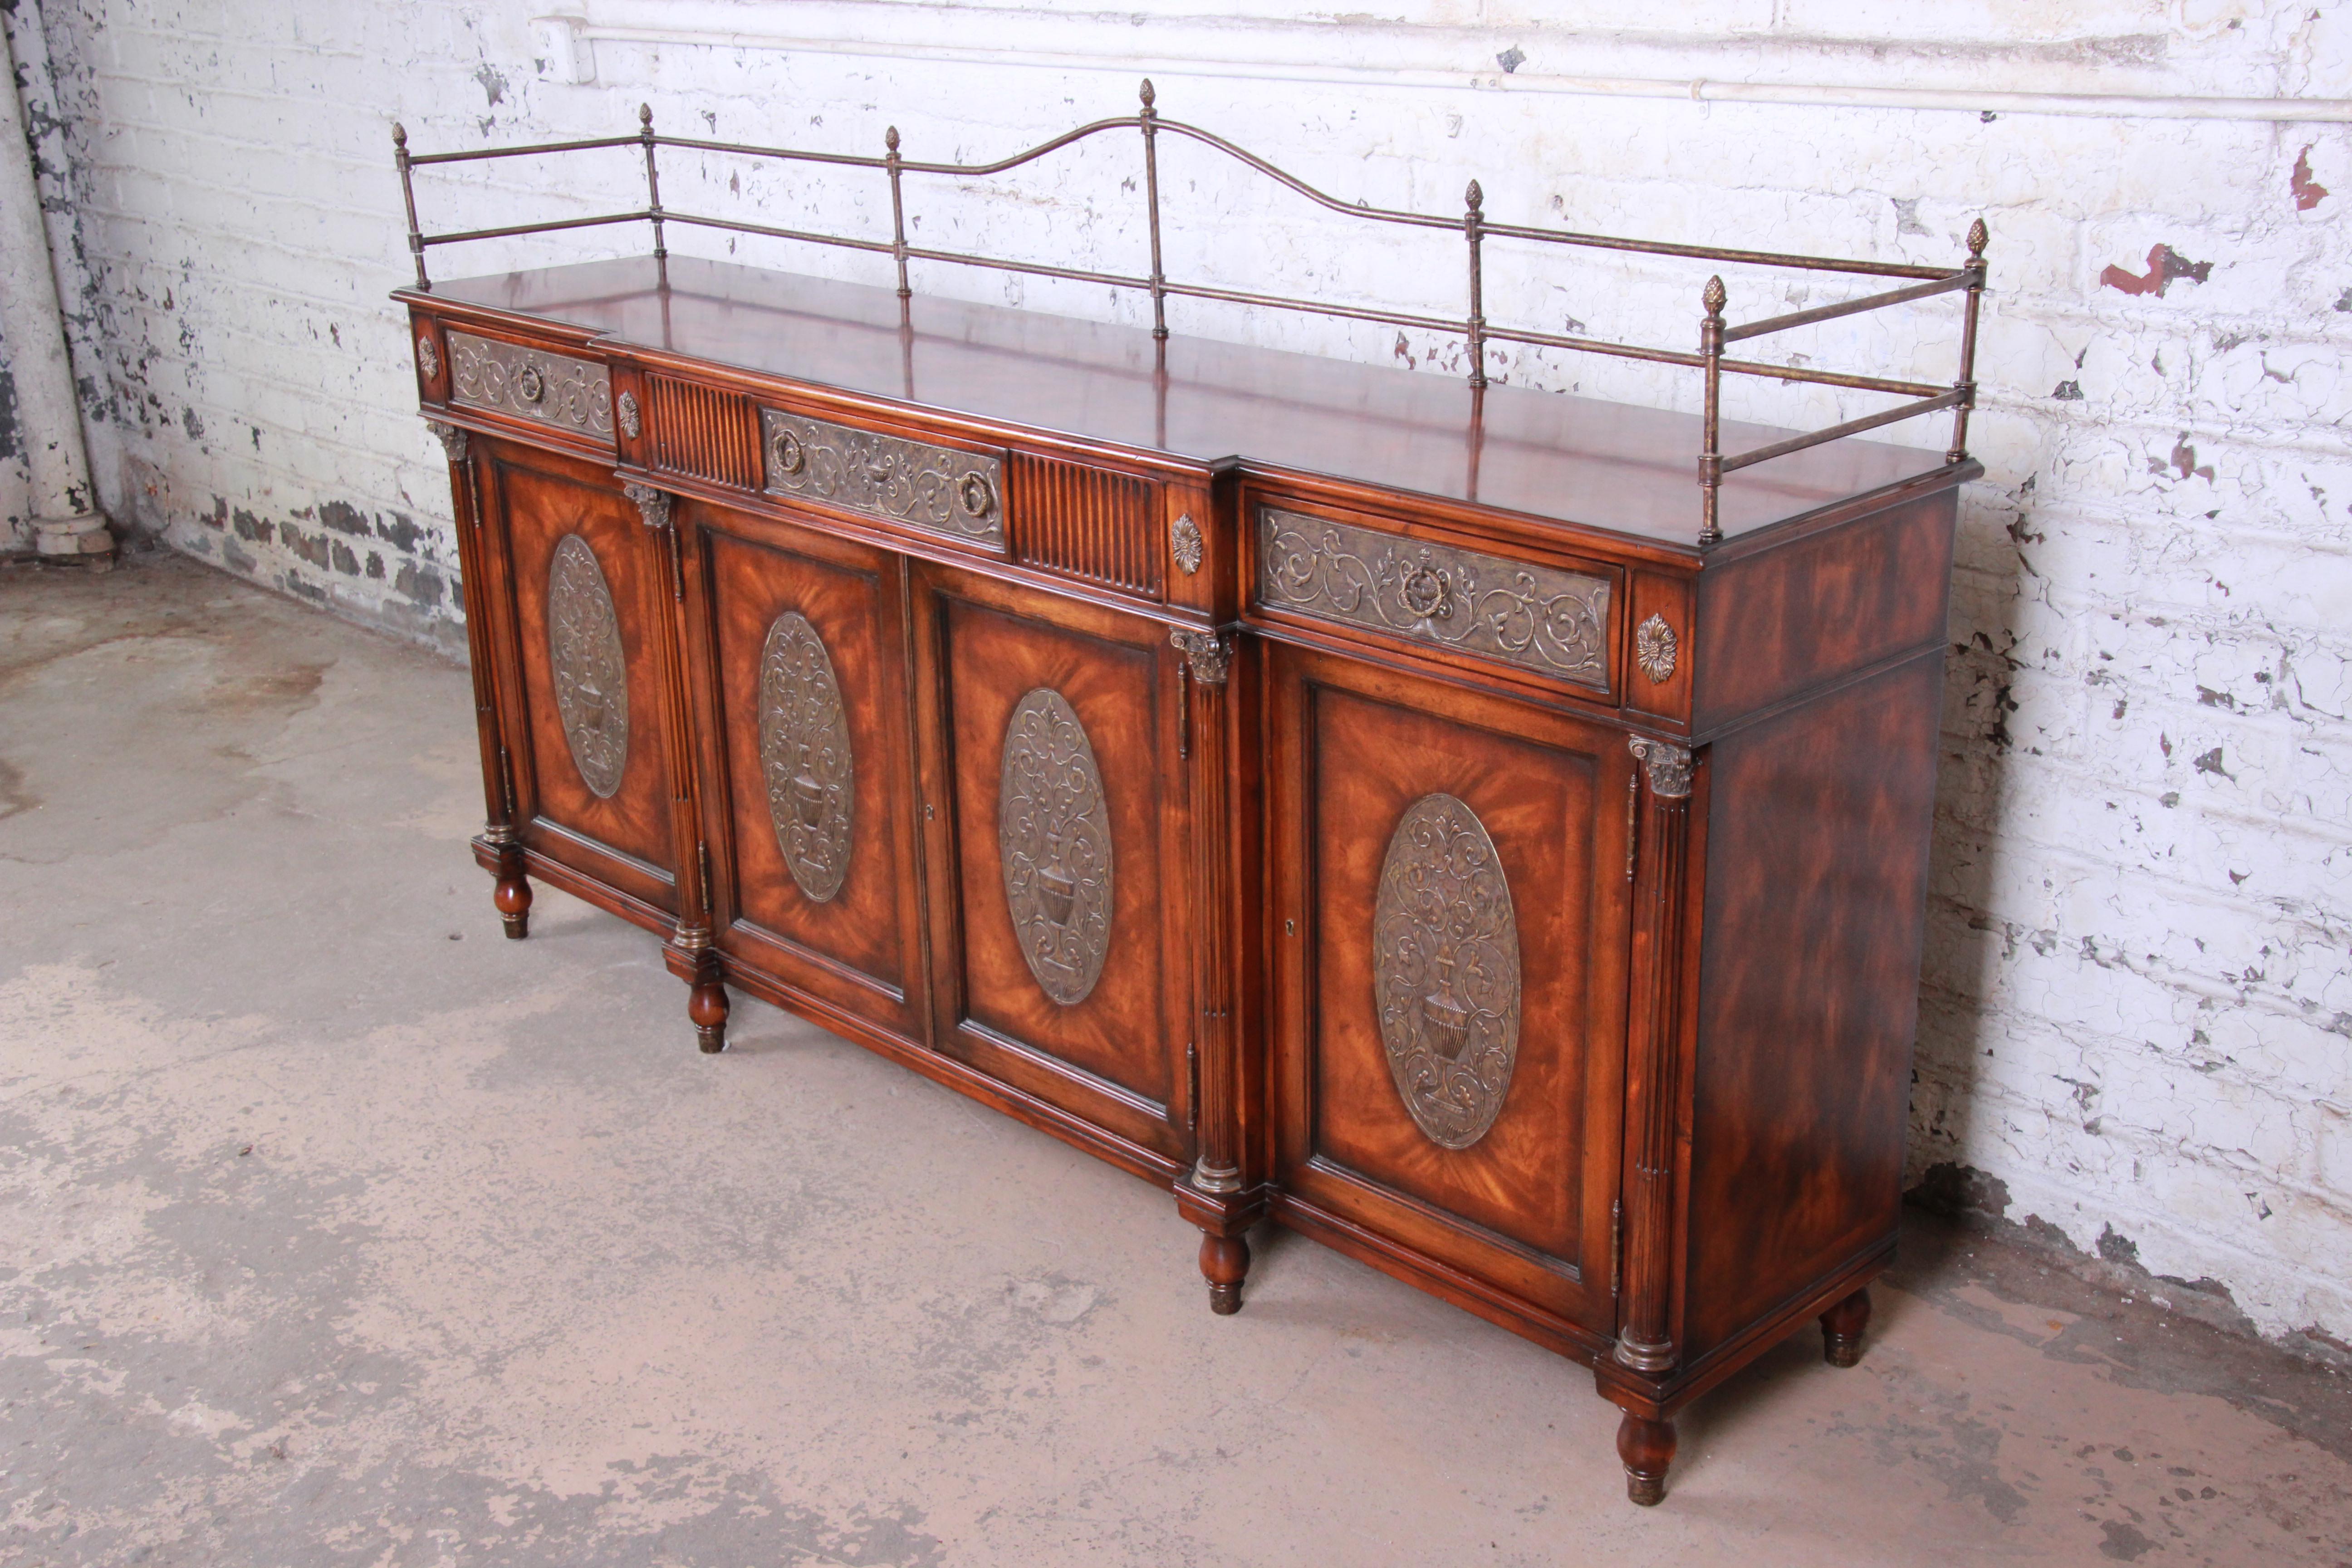 An exceptional and monumental Regency style sideboard buffet or bar cabinet by Theodore Alexander. The sideboard features gorgeous flame mahogany wood grain, Corinthian columns, and ornate brass details with a gallery top. It sits on turned legs